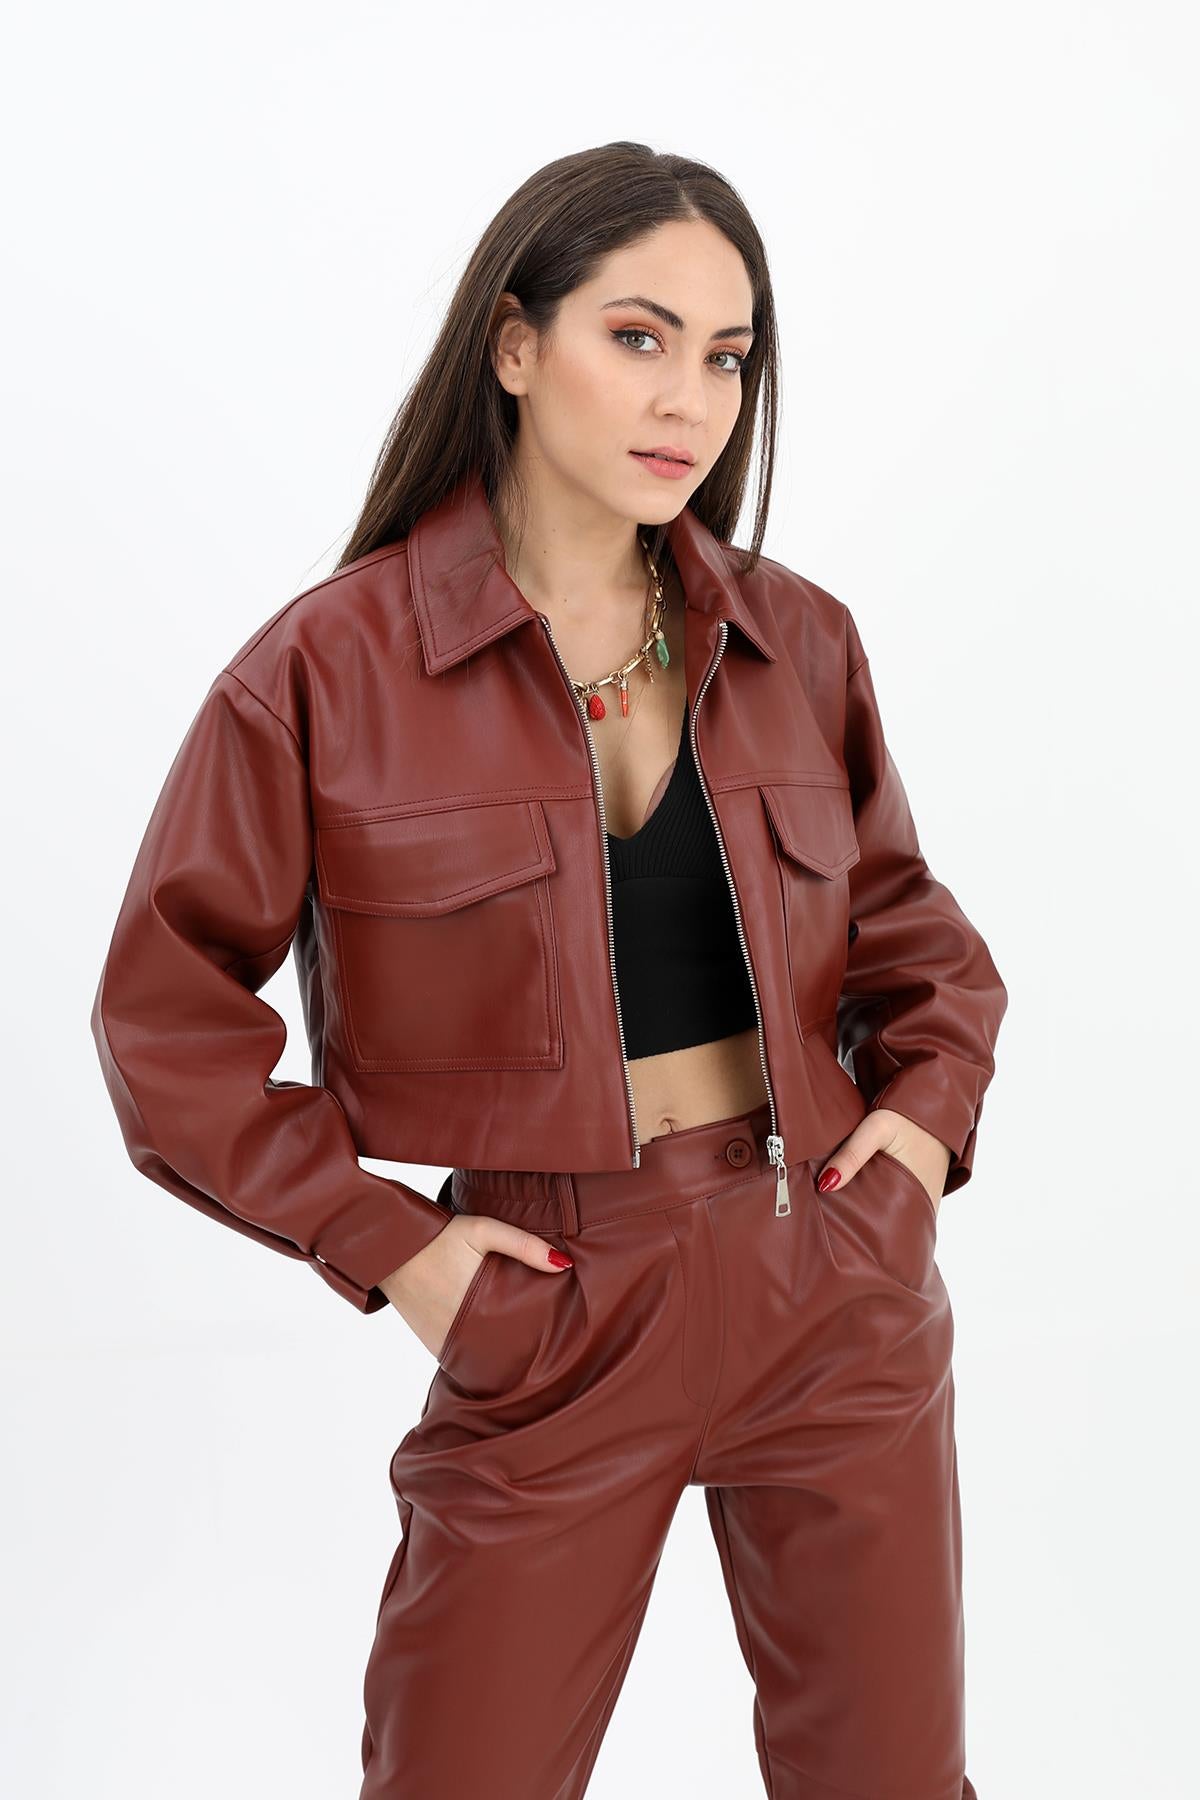 Women's Leather Jacket with Snap on Sleeves and Zipper on the Front - Claret Red - STREETMODE ™